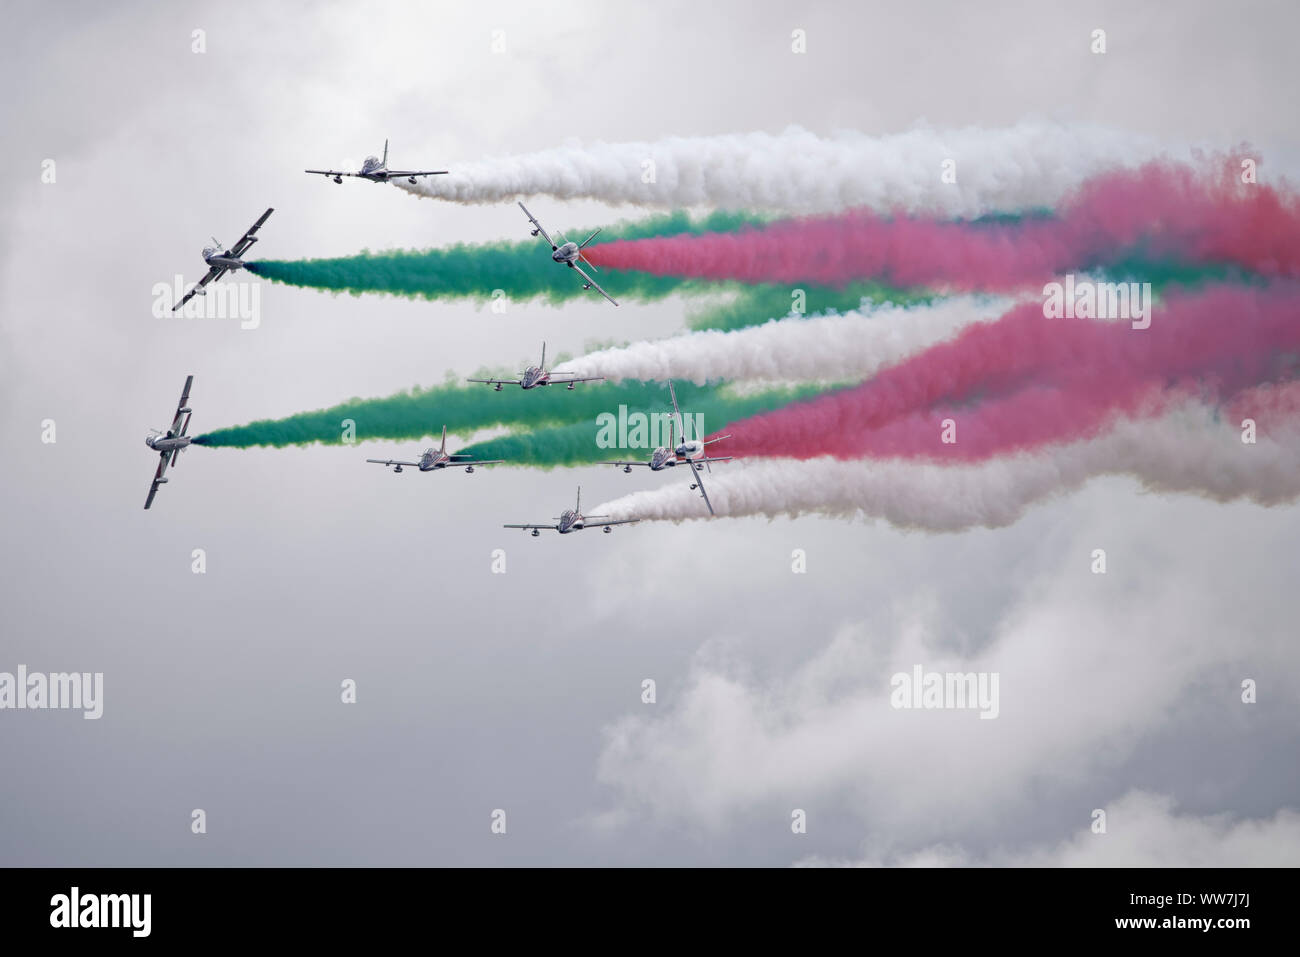 The Italian Air Force Military Aerobatic Display Team Il Frecce Tricolori in their Aermacchi AT-339A jet trainer aircraft put on a superb display. Stock Photo